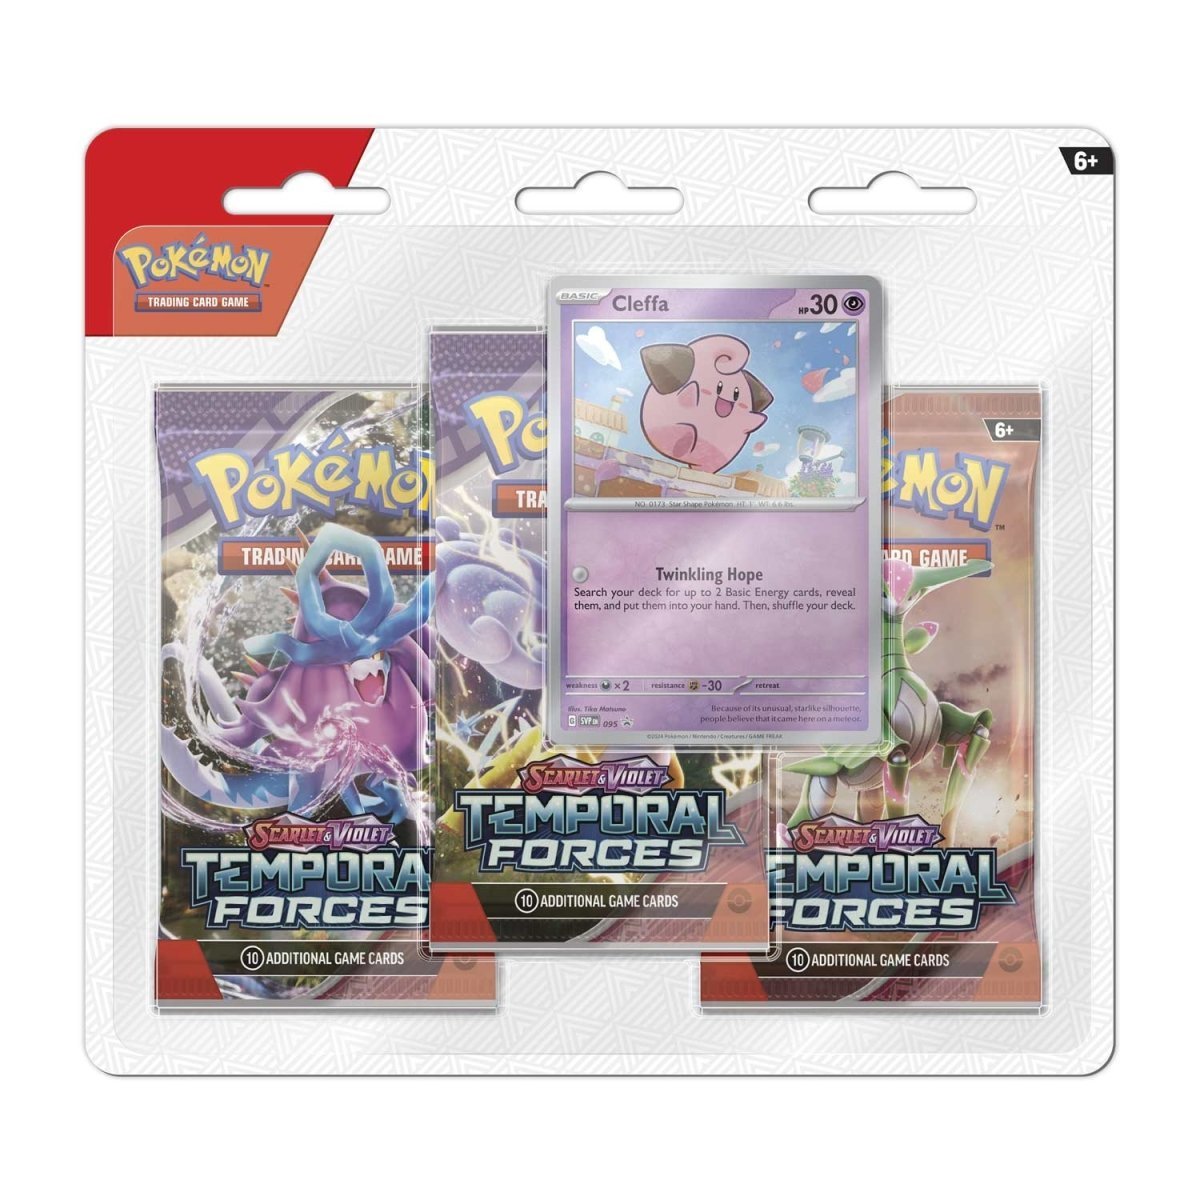 Pokémon TCG: SV - Temporal Forces 3 Booster Blister Pack (Cleffa) - PokeRvmblister pack